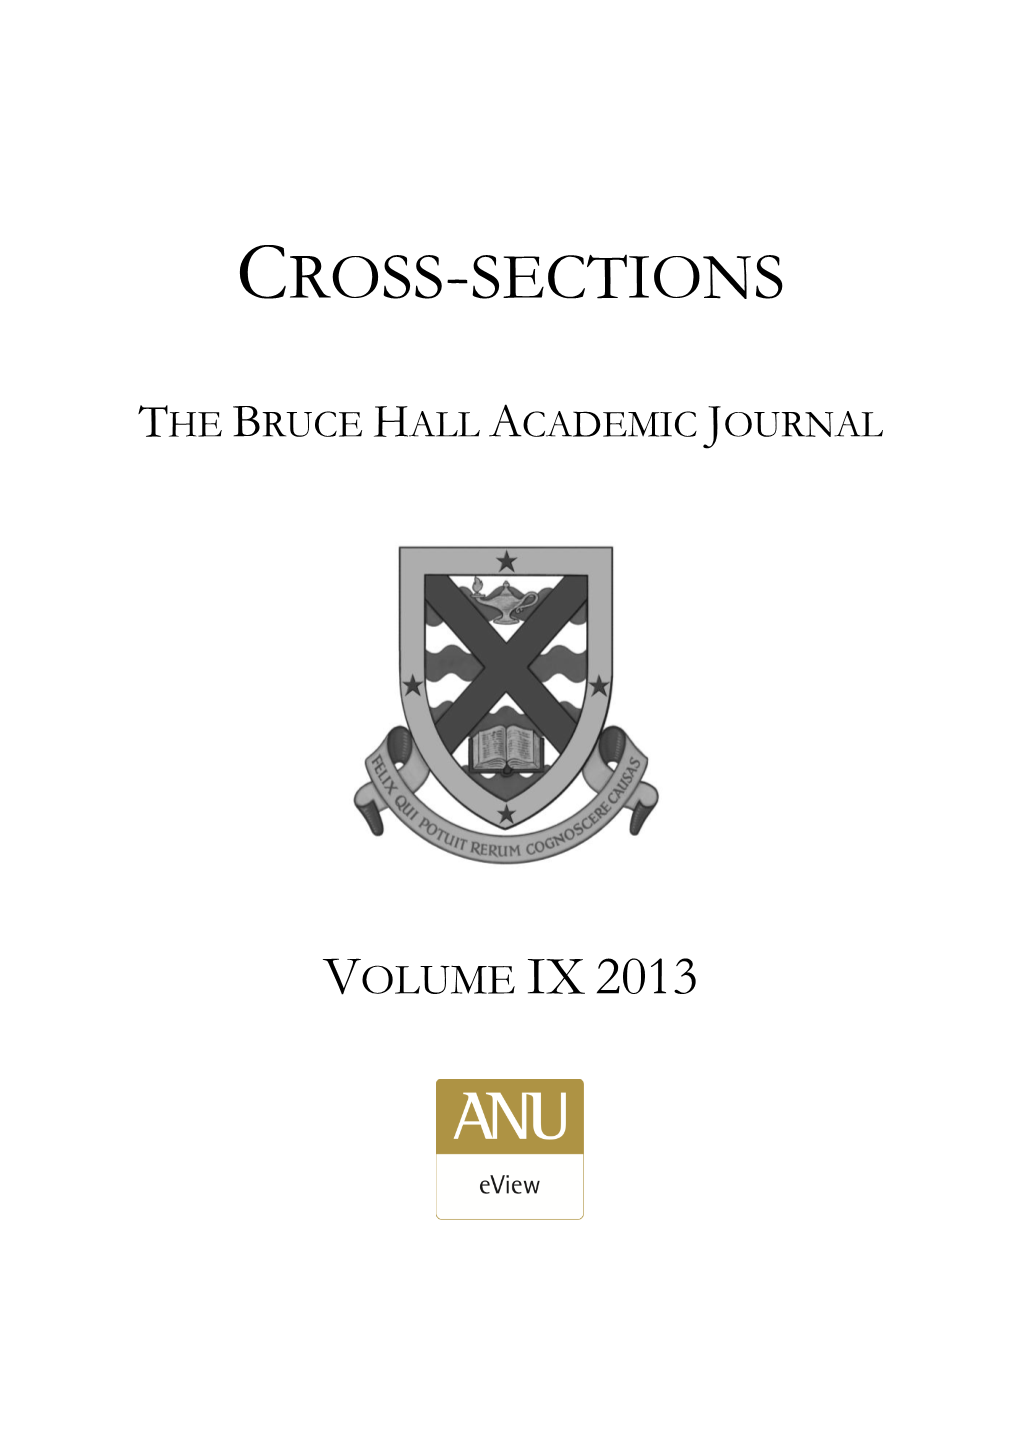 Cross-Sections, the Bruce Hall Academic Journal